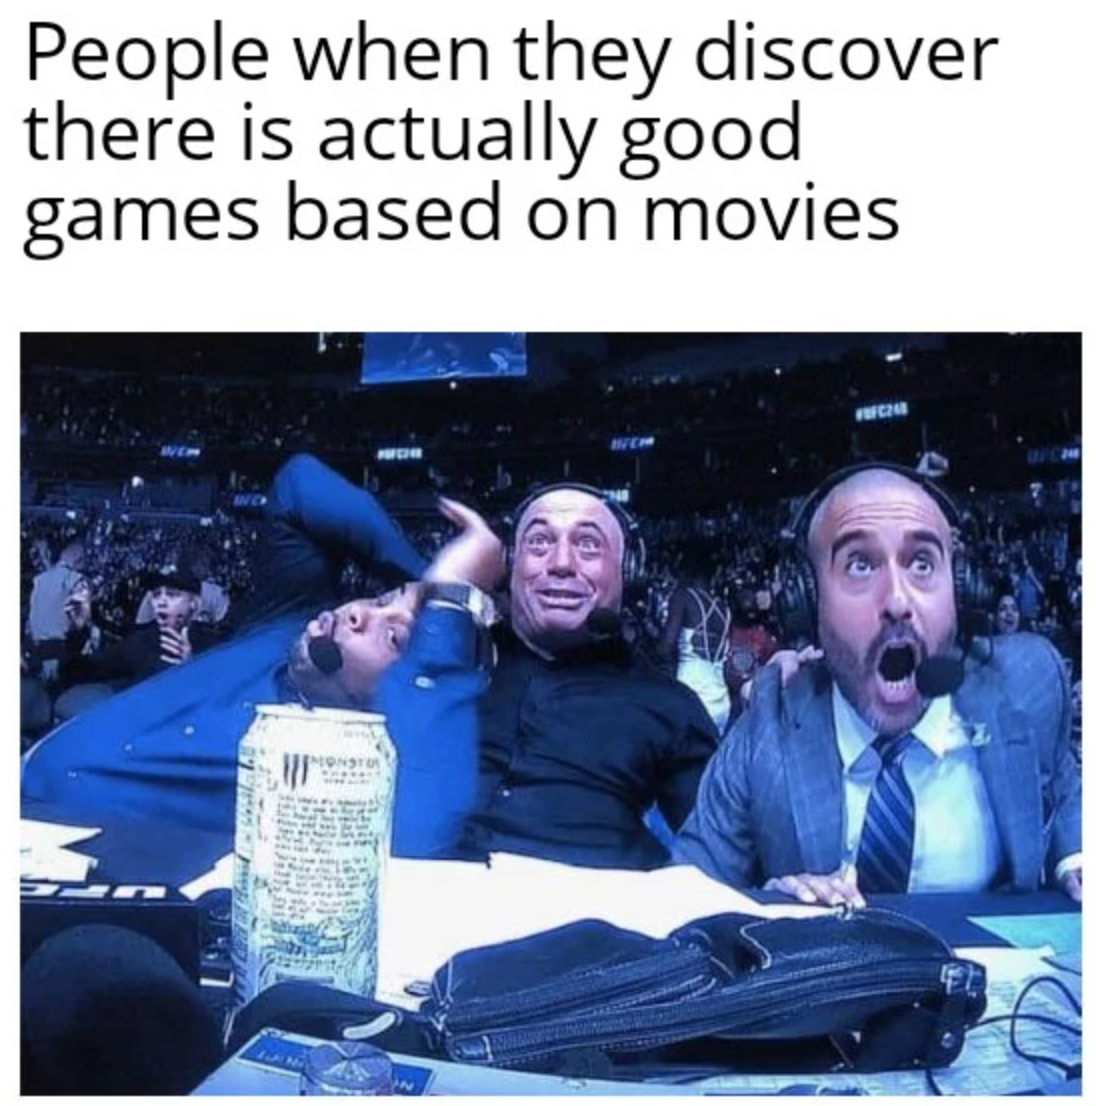 funny gaming memes  - people over 50 watching their bird feeder - People when they discover there is actually good games based on movies !